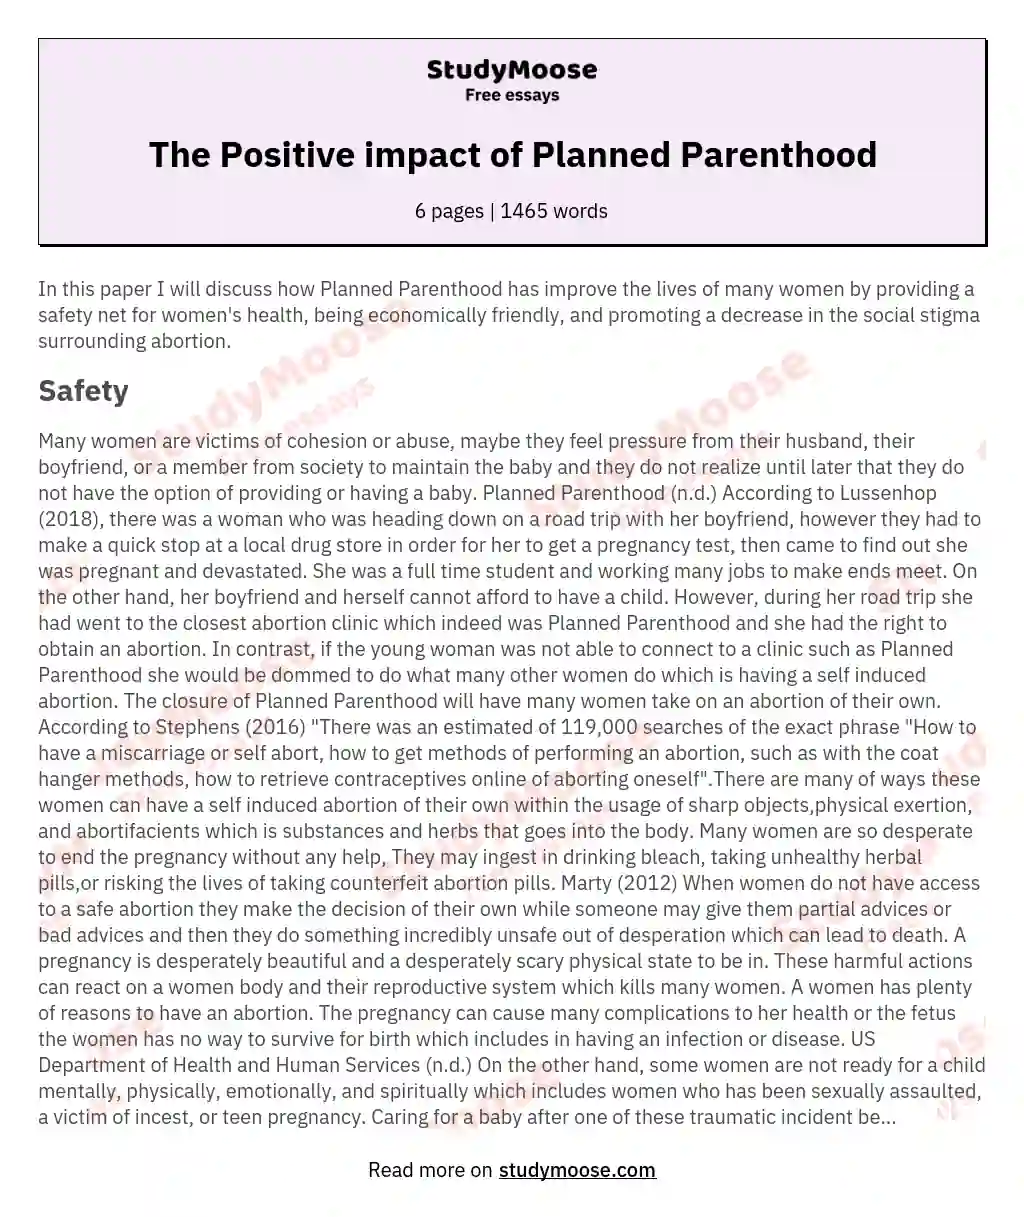 The Positive impact of Planned Parenthood